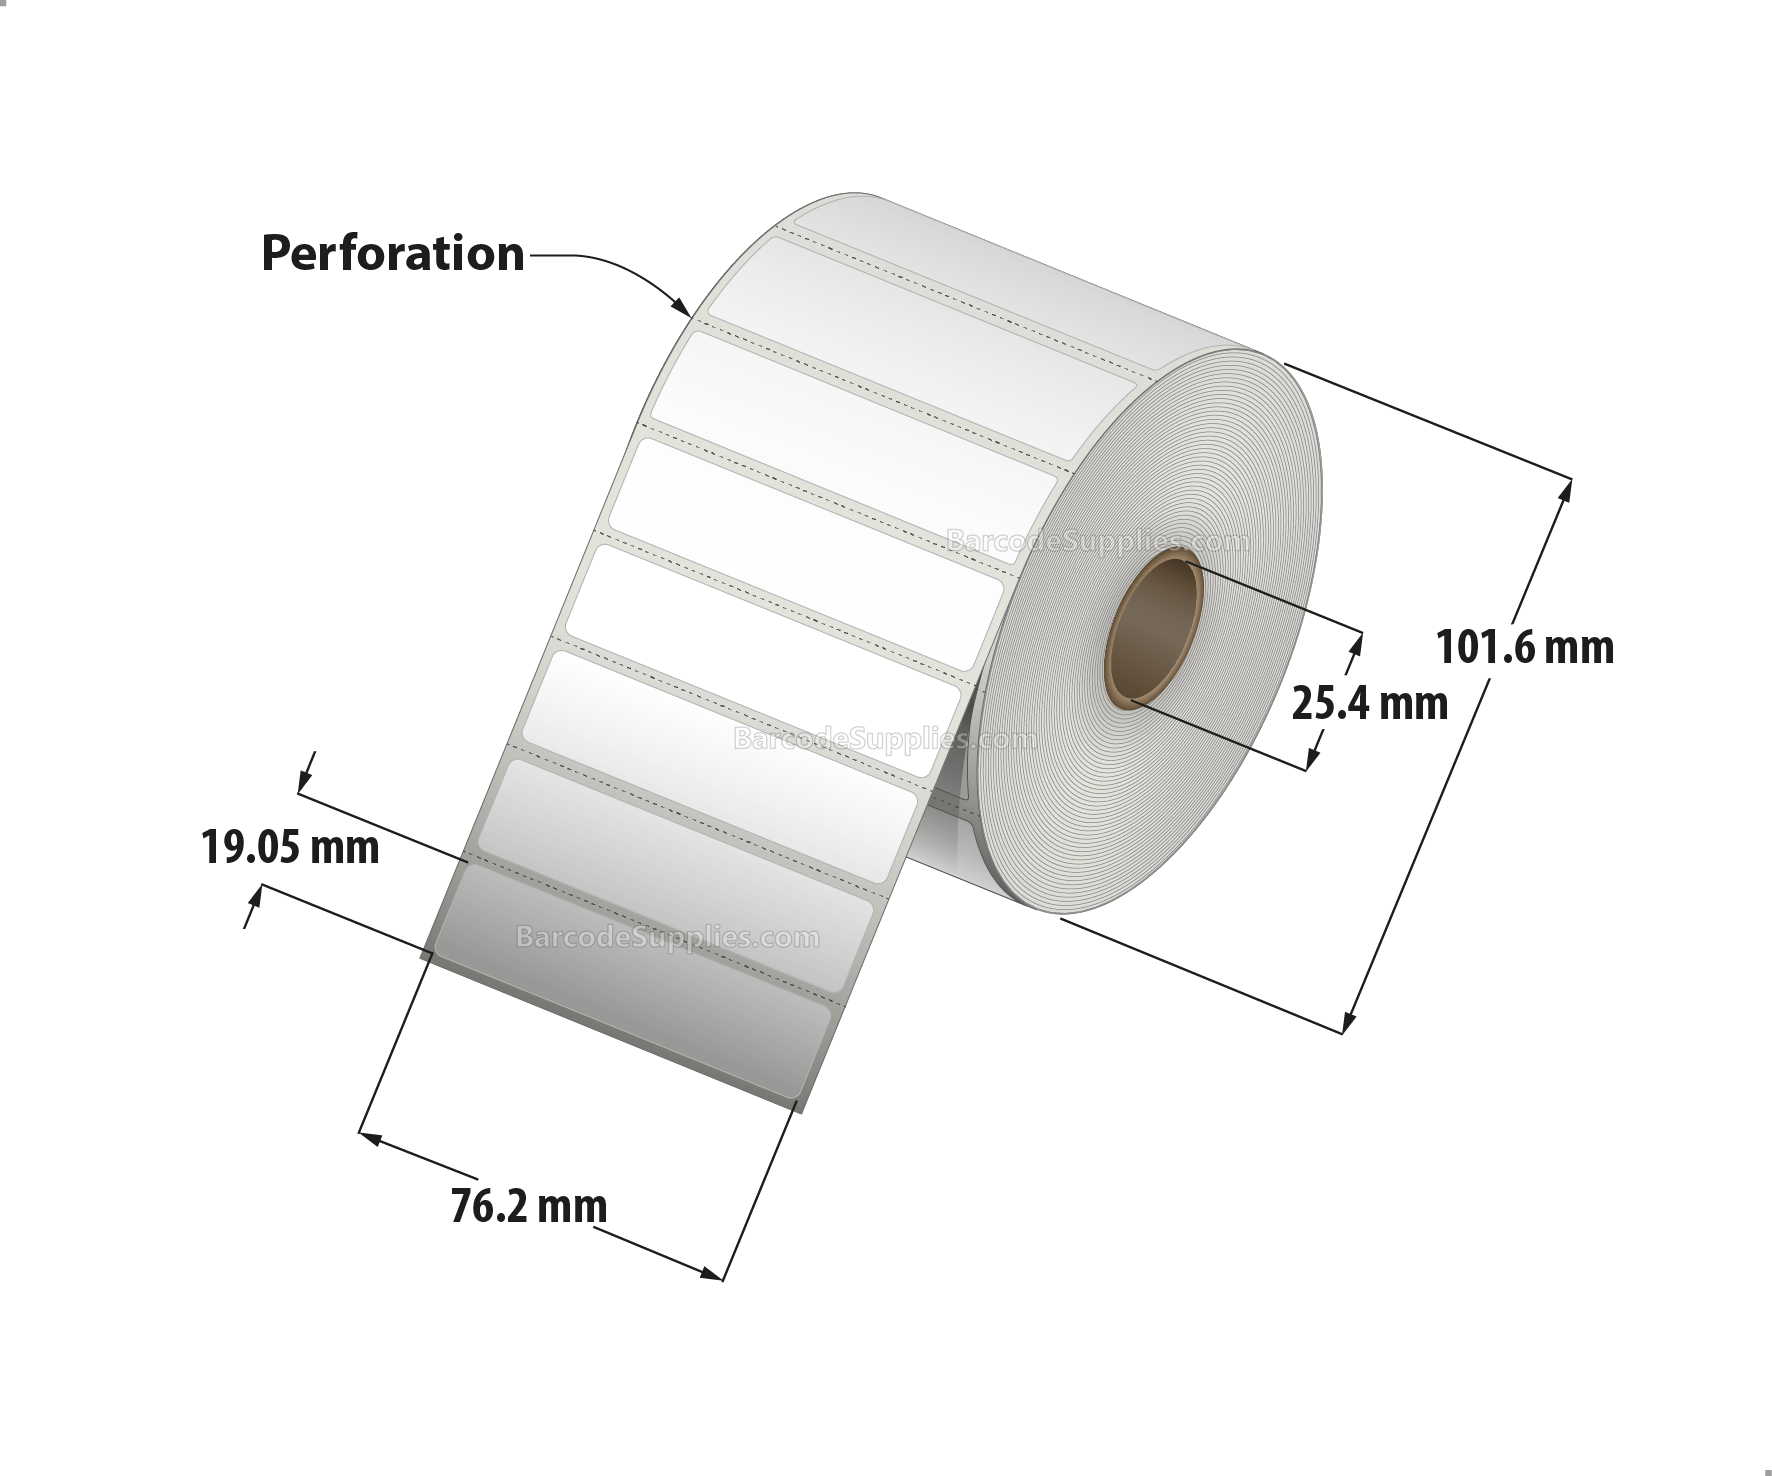 3 x 0.75 Direct Thermal White Labels With Acrylic Adhesive - Perforated - 1750 Labels Per Roll - Carton Of 12 Rolls - 21000 Labels Total - MPN: RD-3-075-1750-1